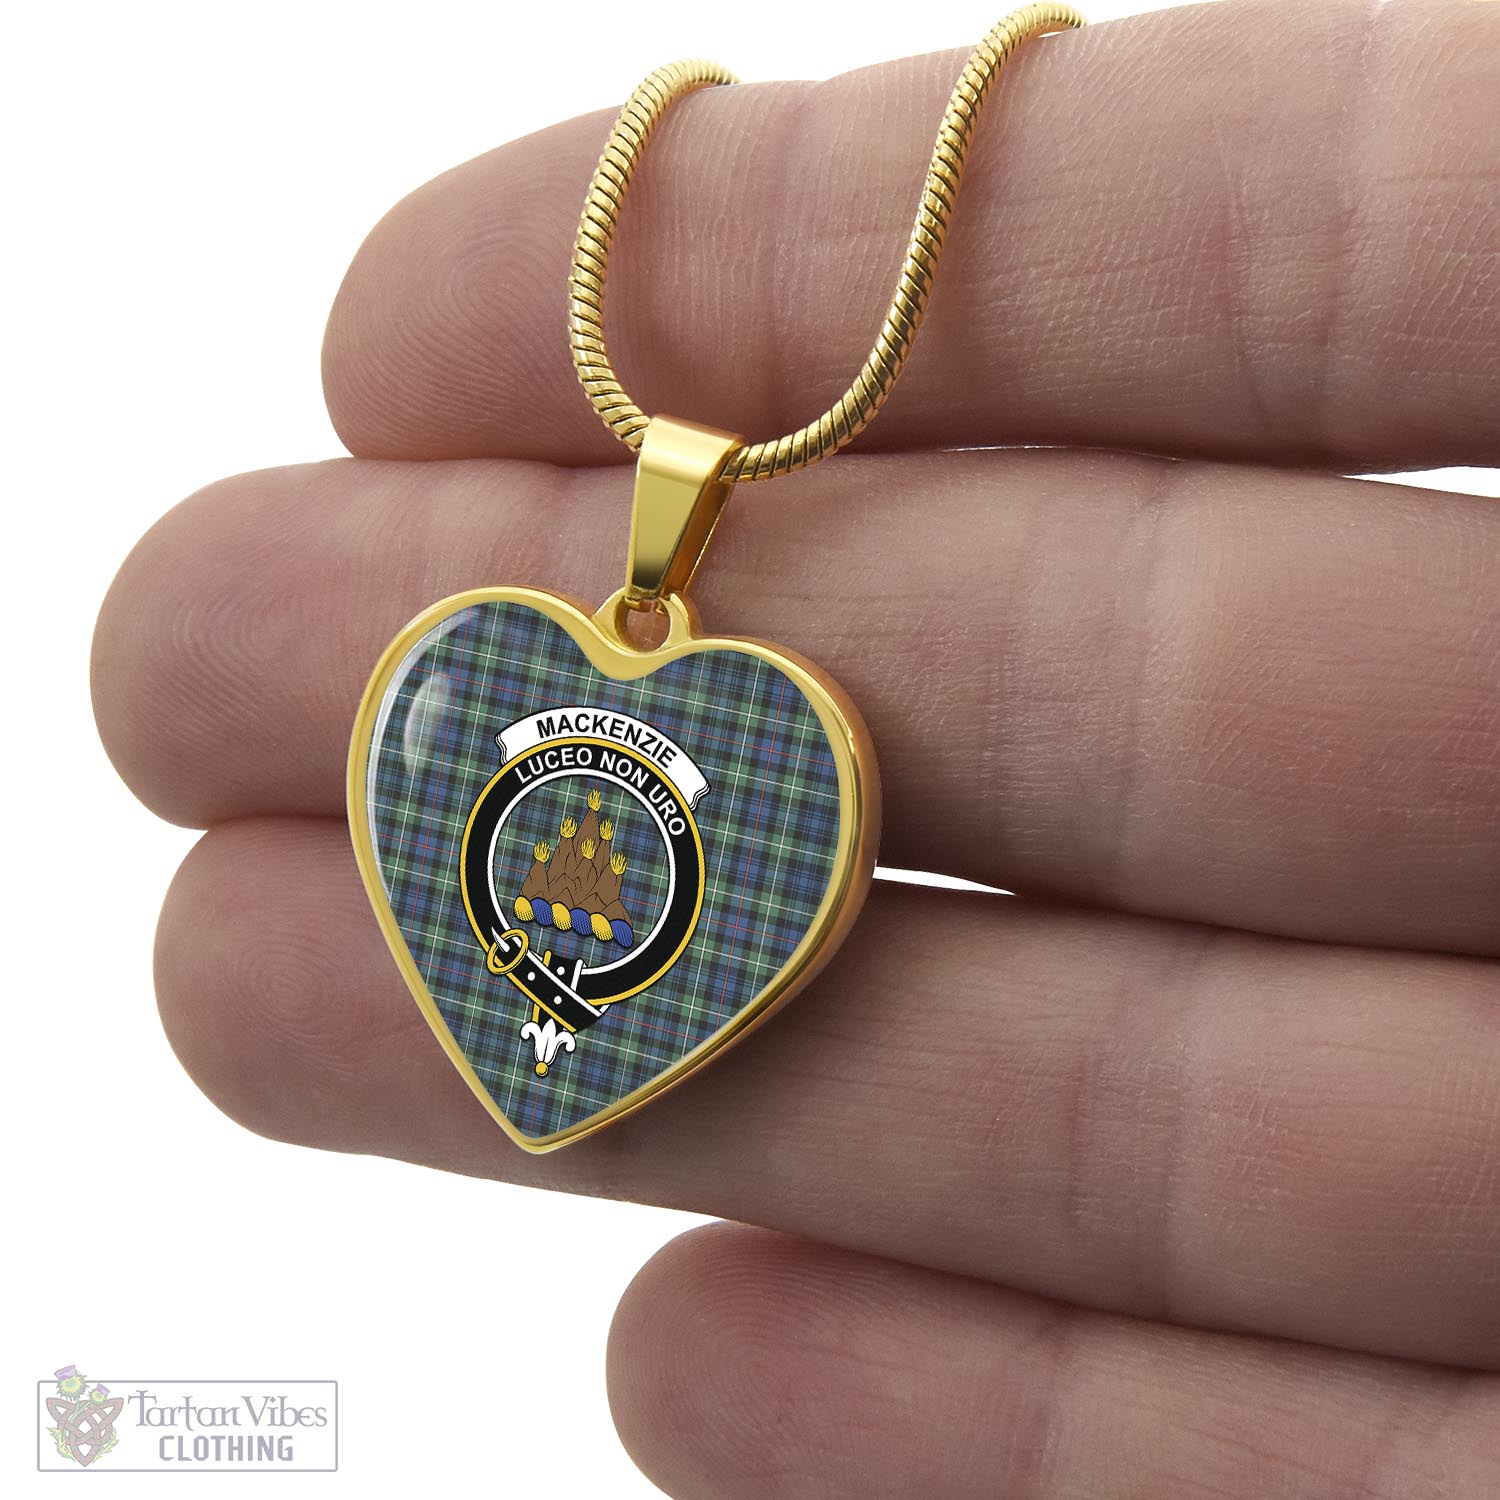 Tartan Vibes Clothing MacKenzie Ancient Tartan Heart Necklace with Family Crest